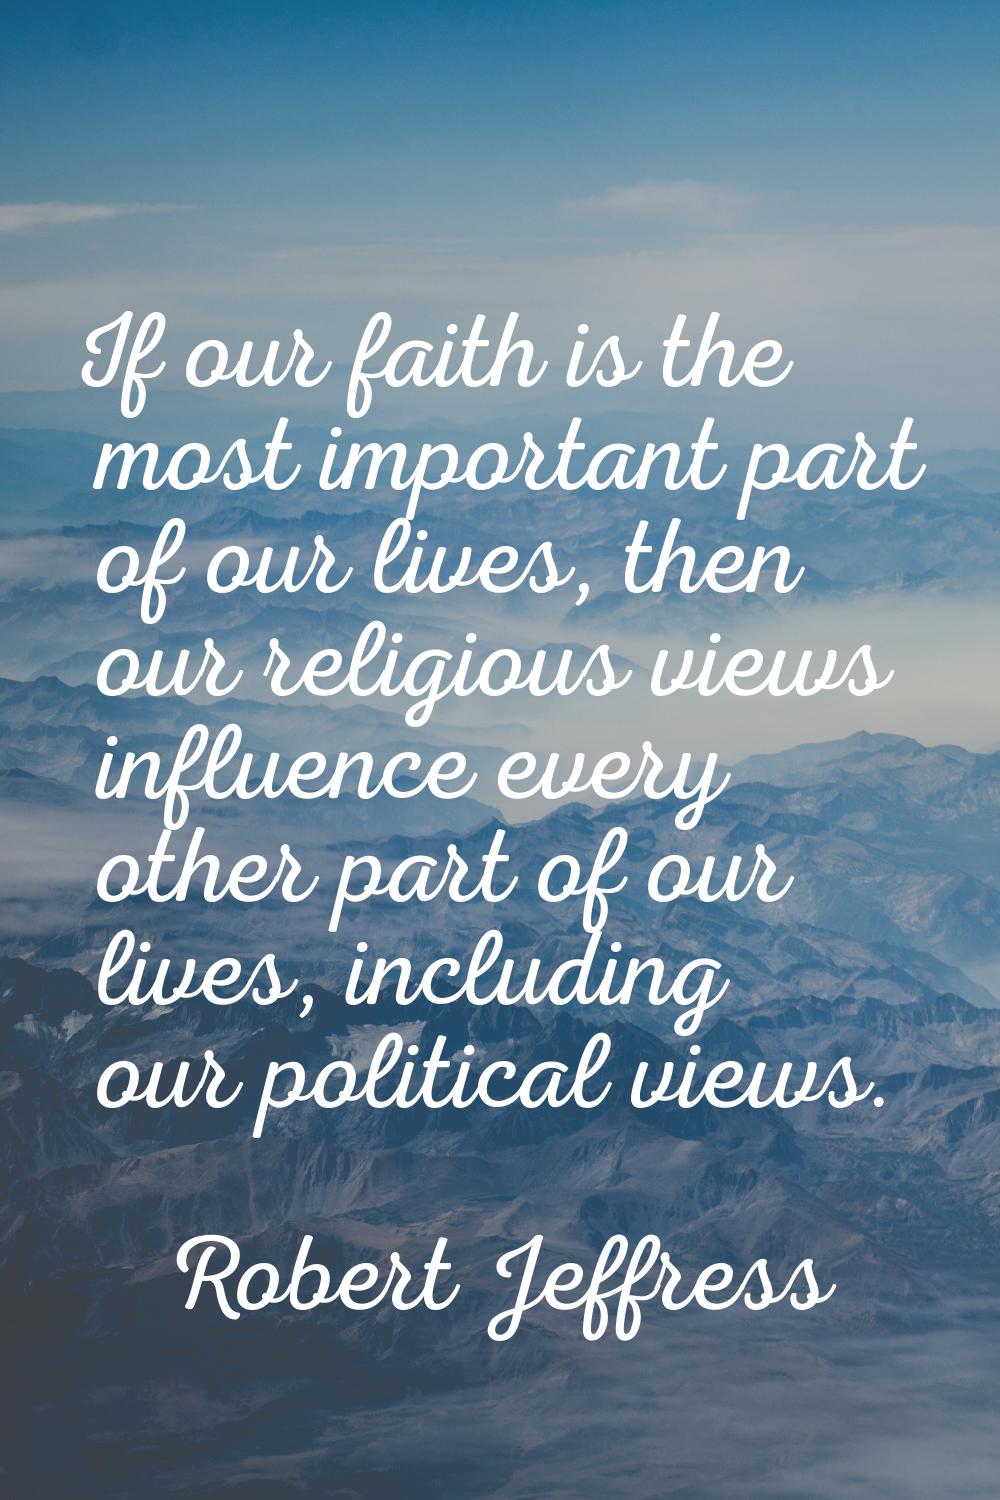 If our faith is the most important part of our lives, then our religious views influence every othe